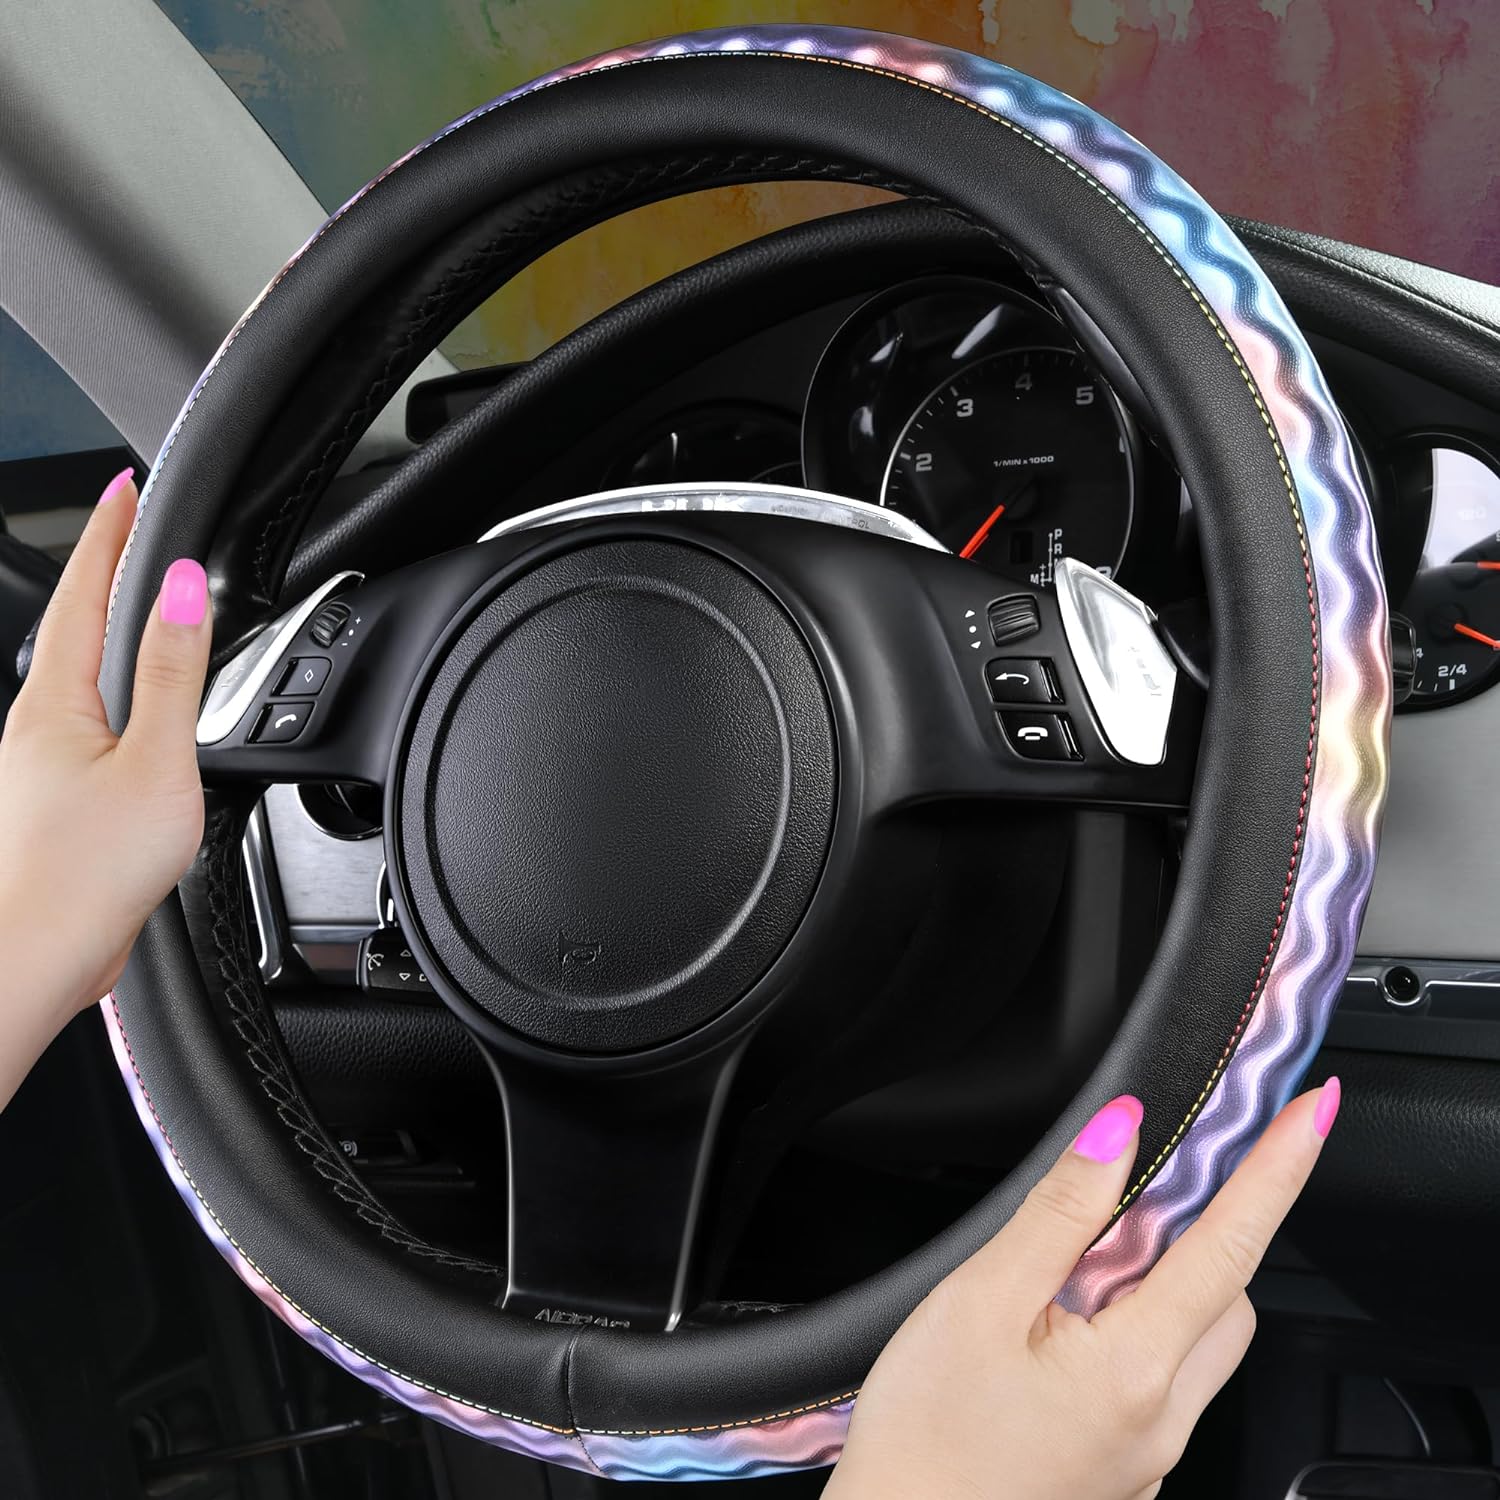 CAR PASS Steering Wheel Cover,Sporty Glossy Iridescent Reflective Leather Universal Fit Steering Wheel Covers,Fit for 14.5-15 inchs Car,Truck,SUV,sedans (Black)